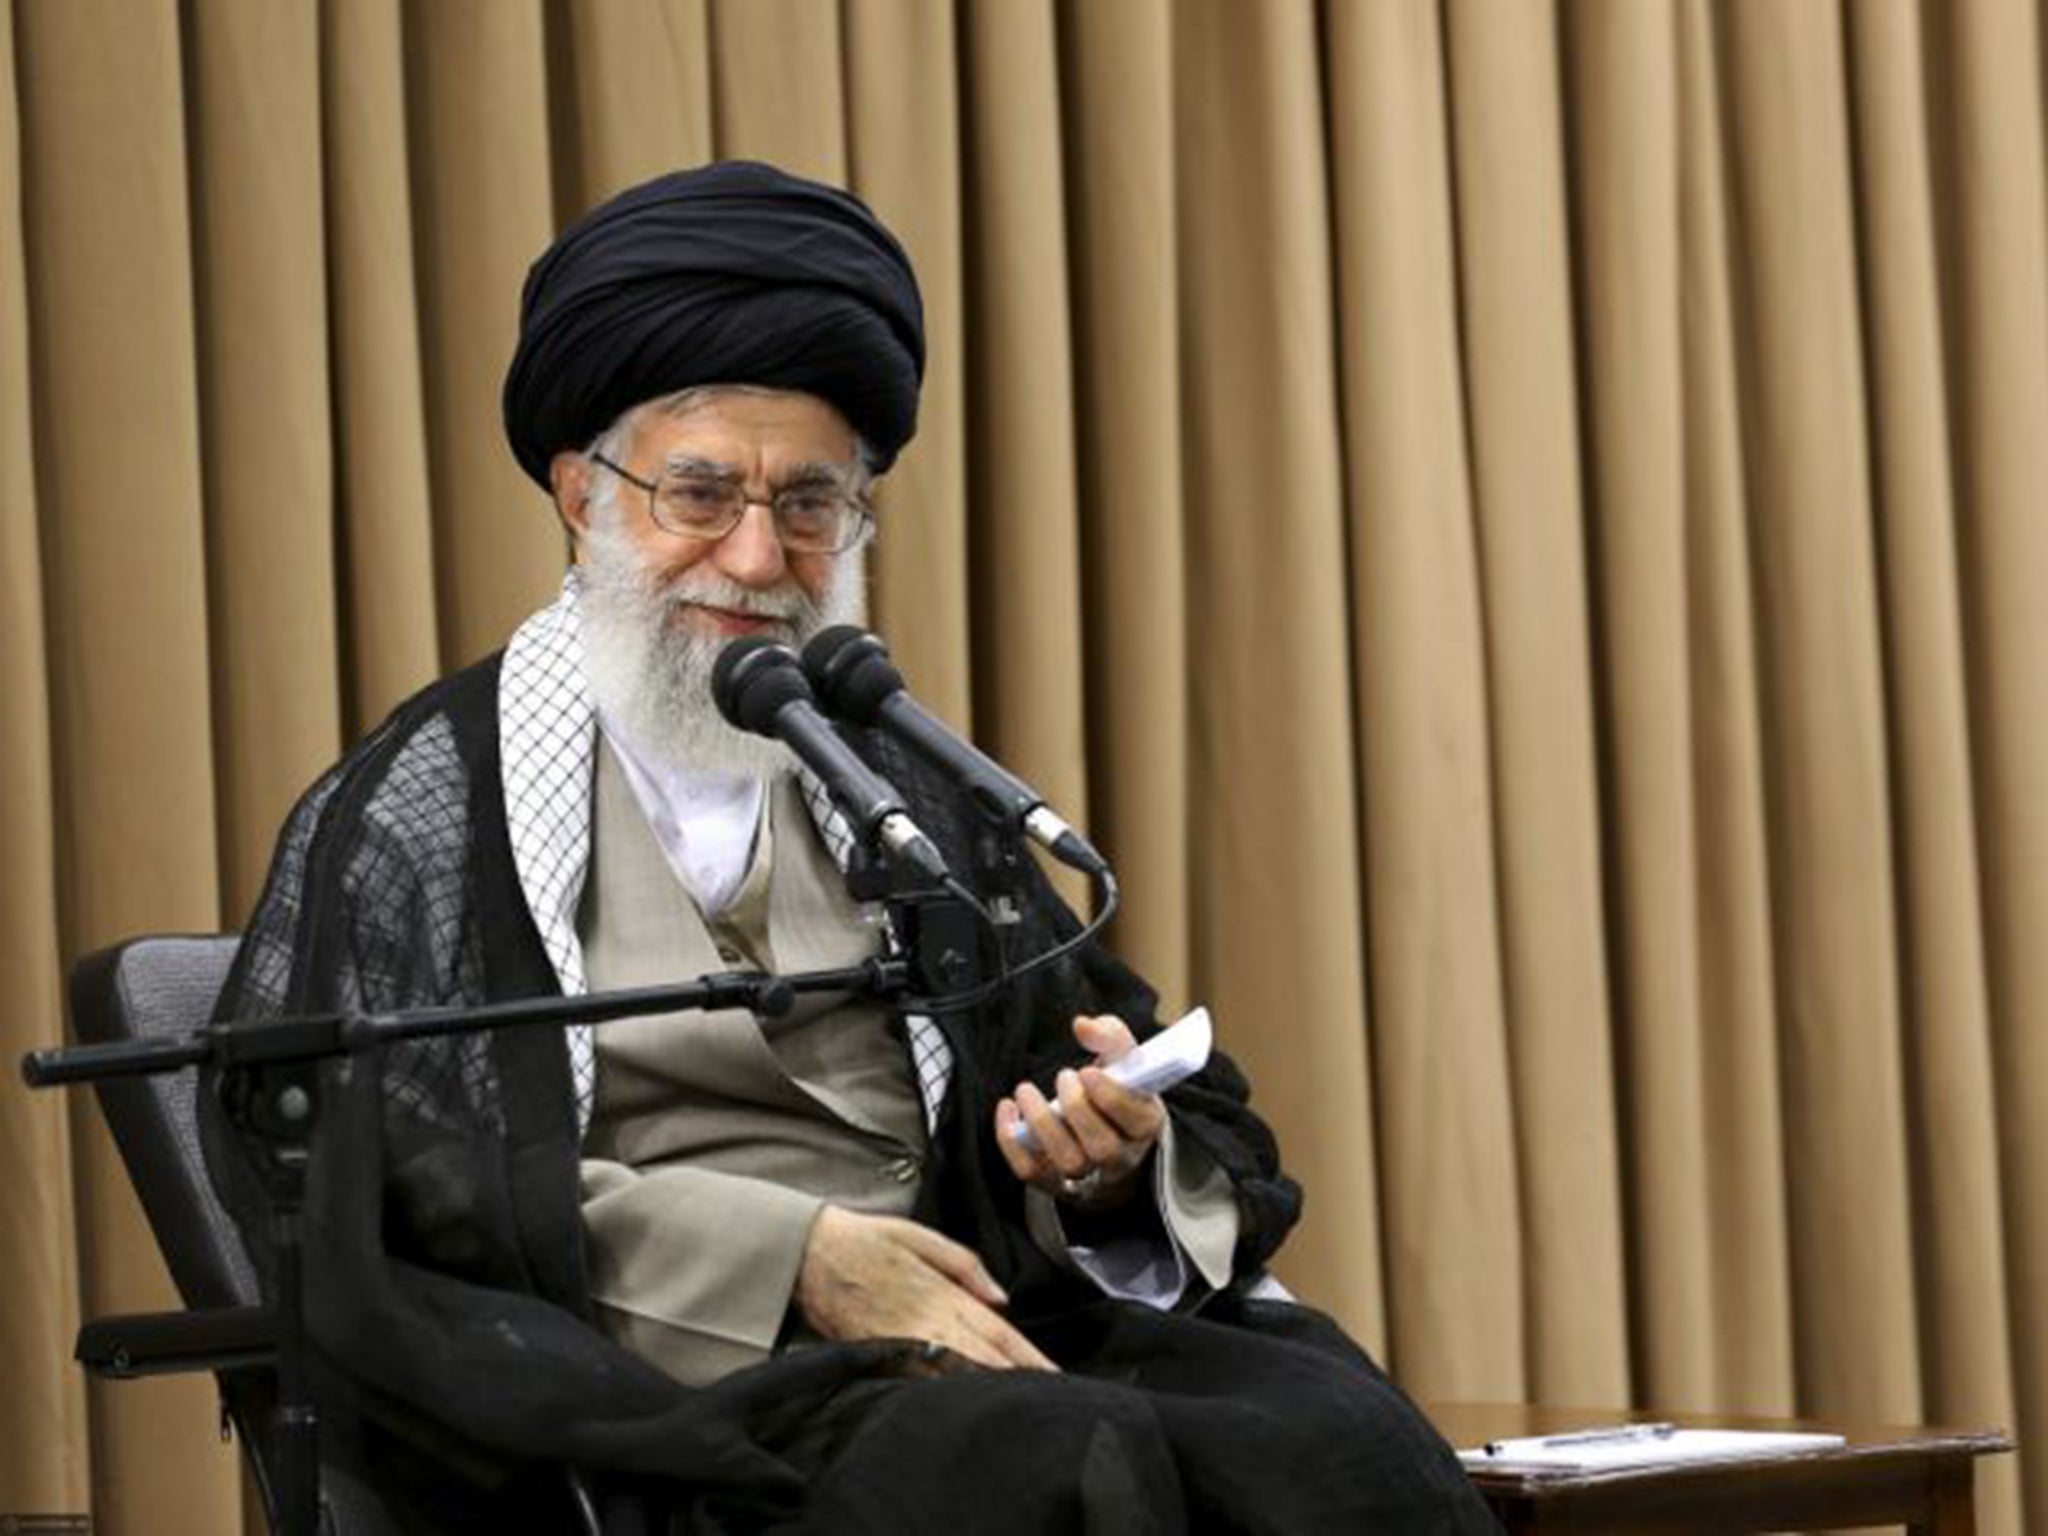 File: Iran authorities shut down a daily newspaper after it ran a front-page graphic linking poverty to Iranian Supreme Leader Ayatollah Ali Khamenei